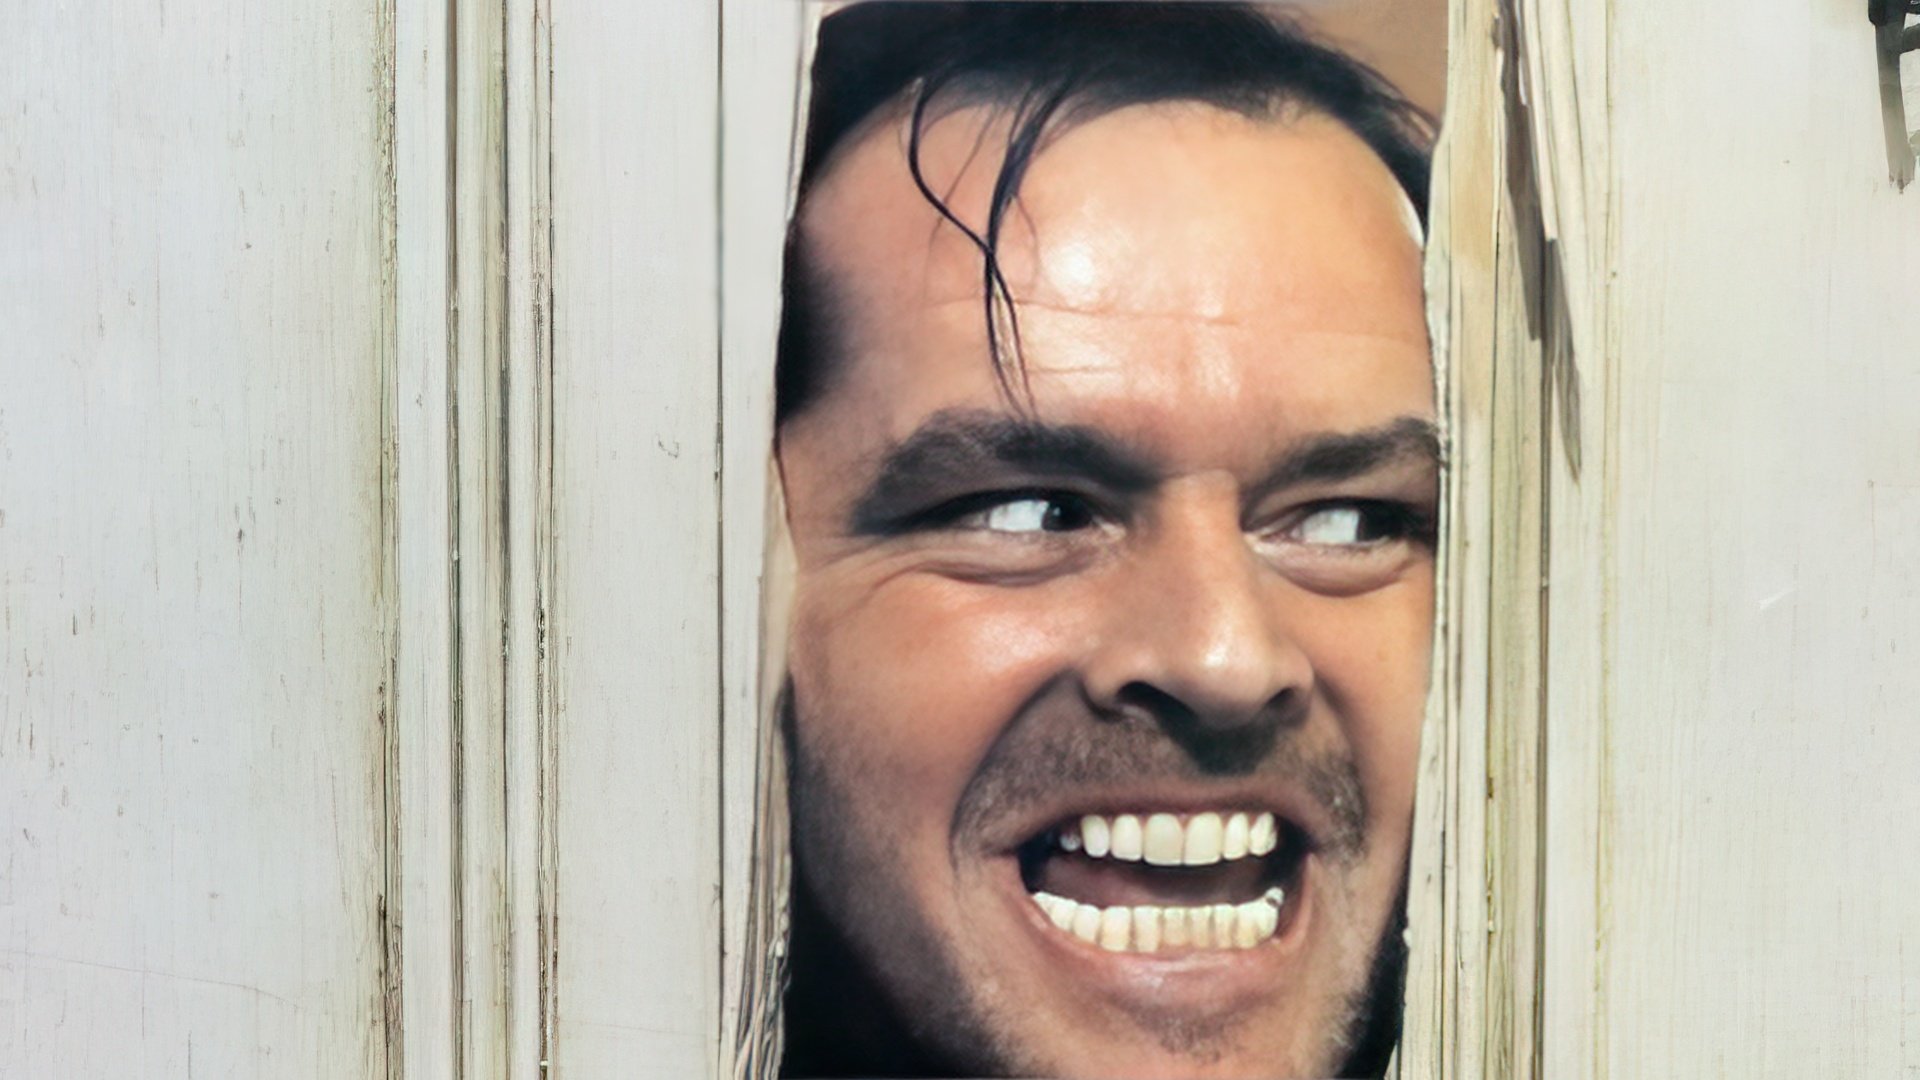 Famous shot of Jack Nicholson from “The Shining”